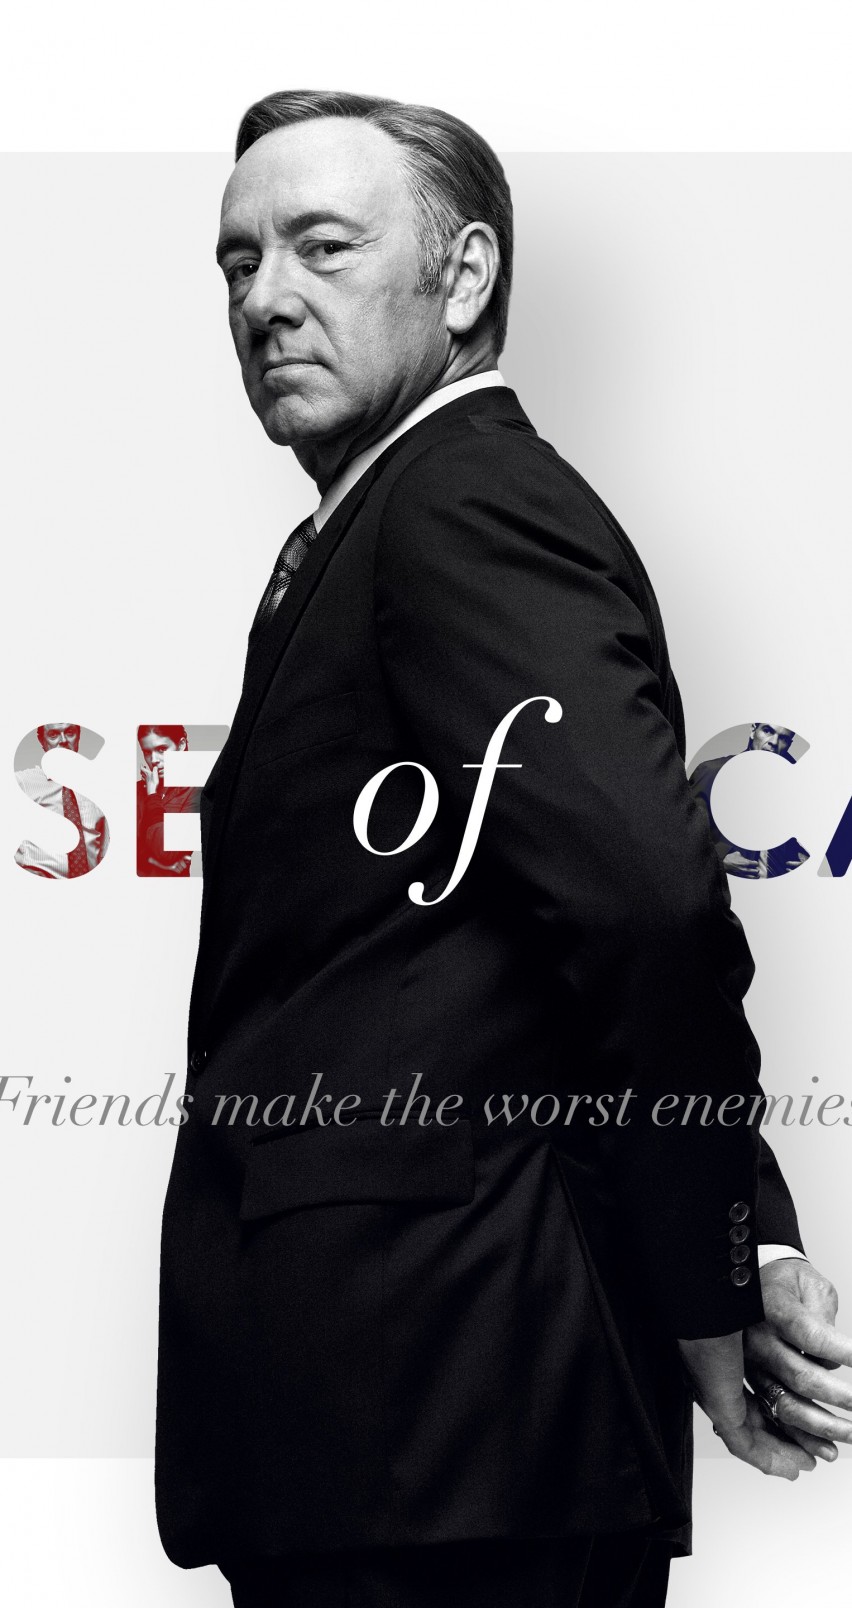 Frank Underwood - House of Cards Wallpaper for Apple iPhone 6 / 6s